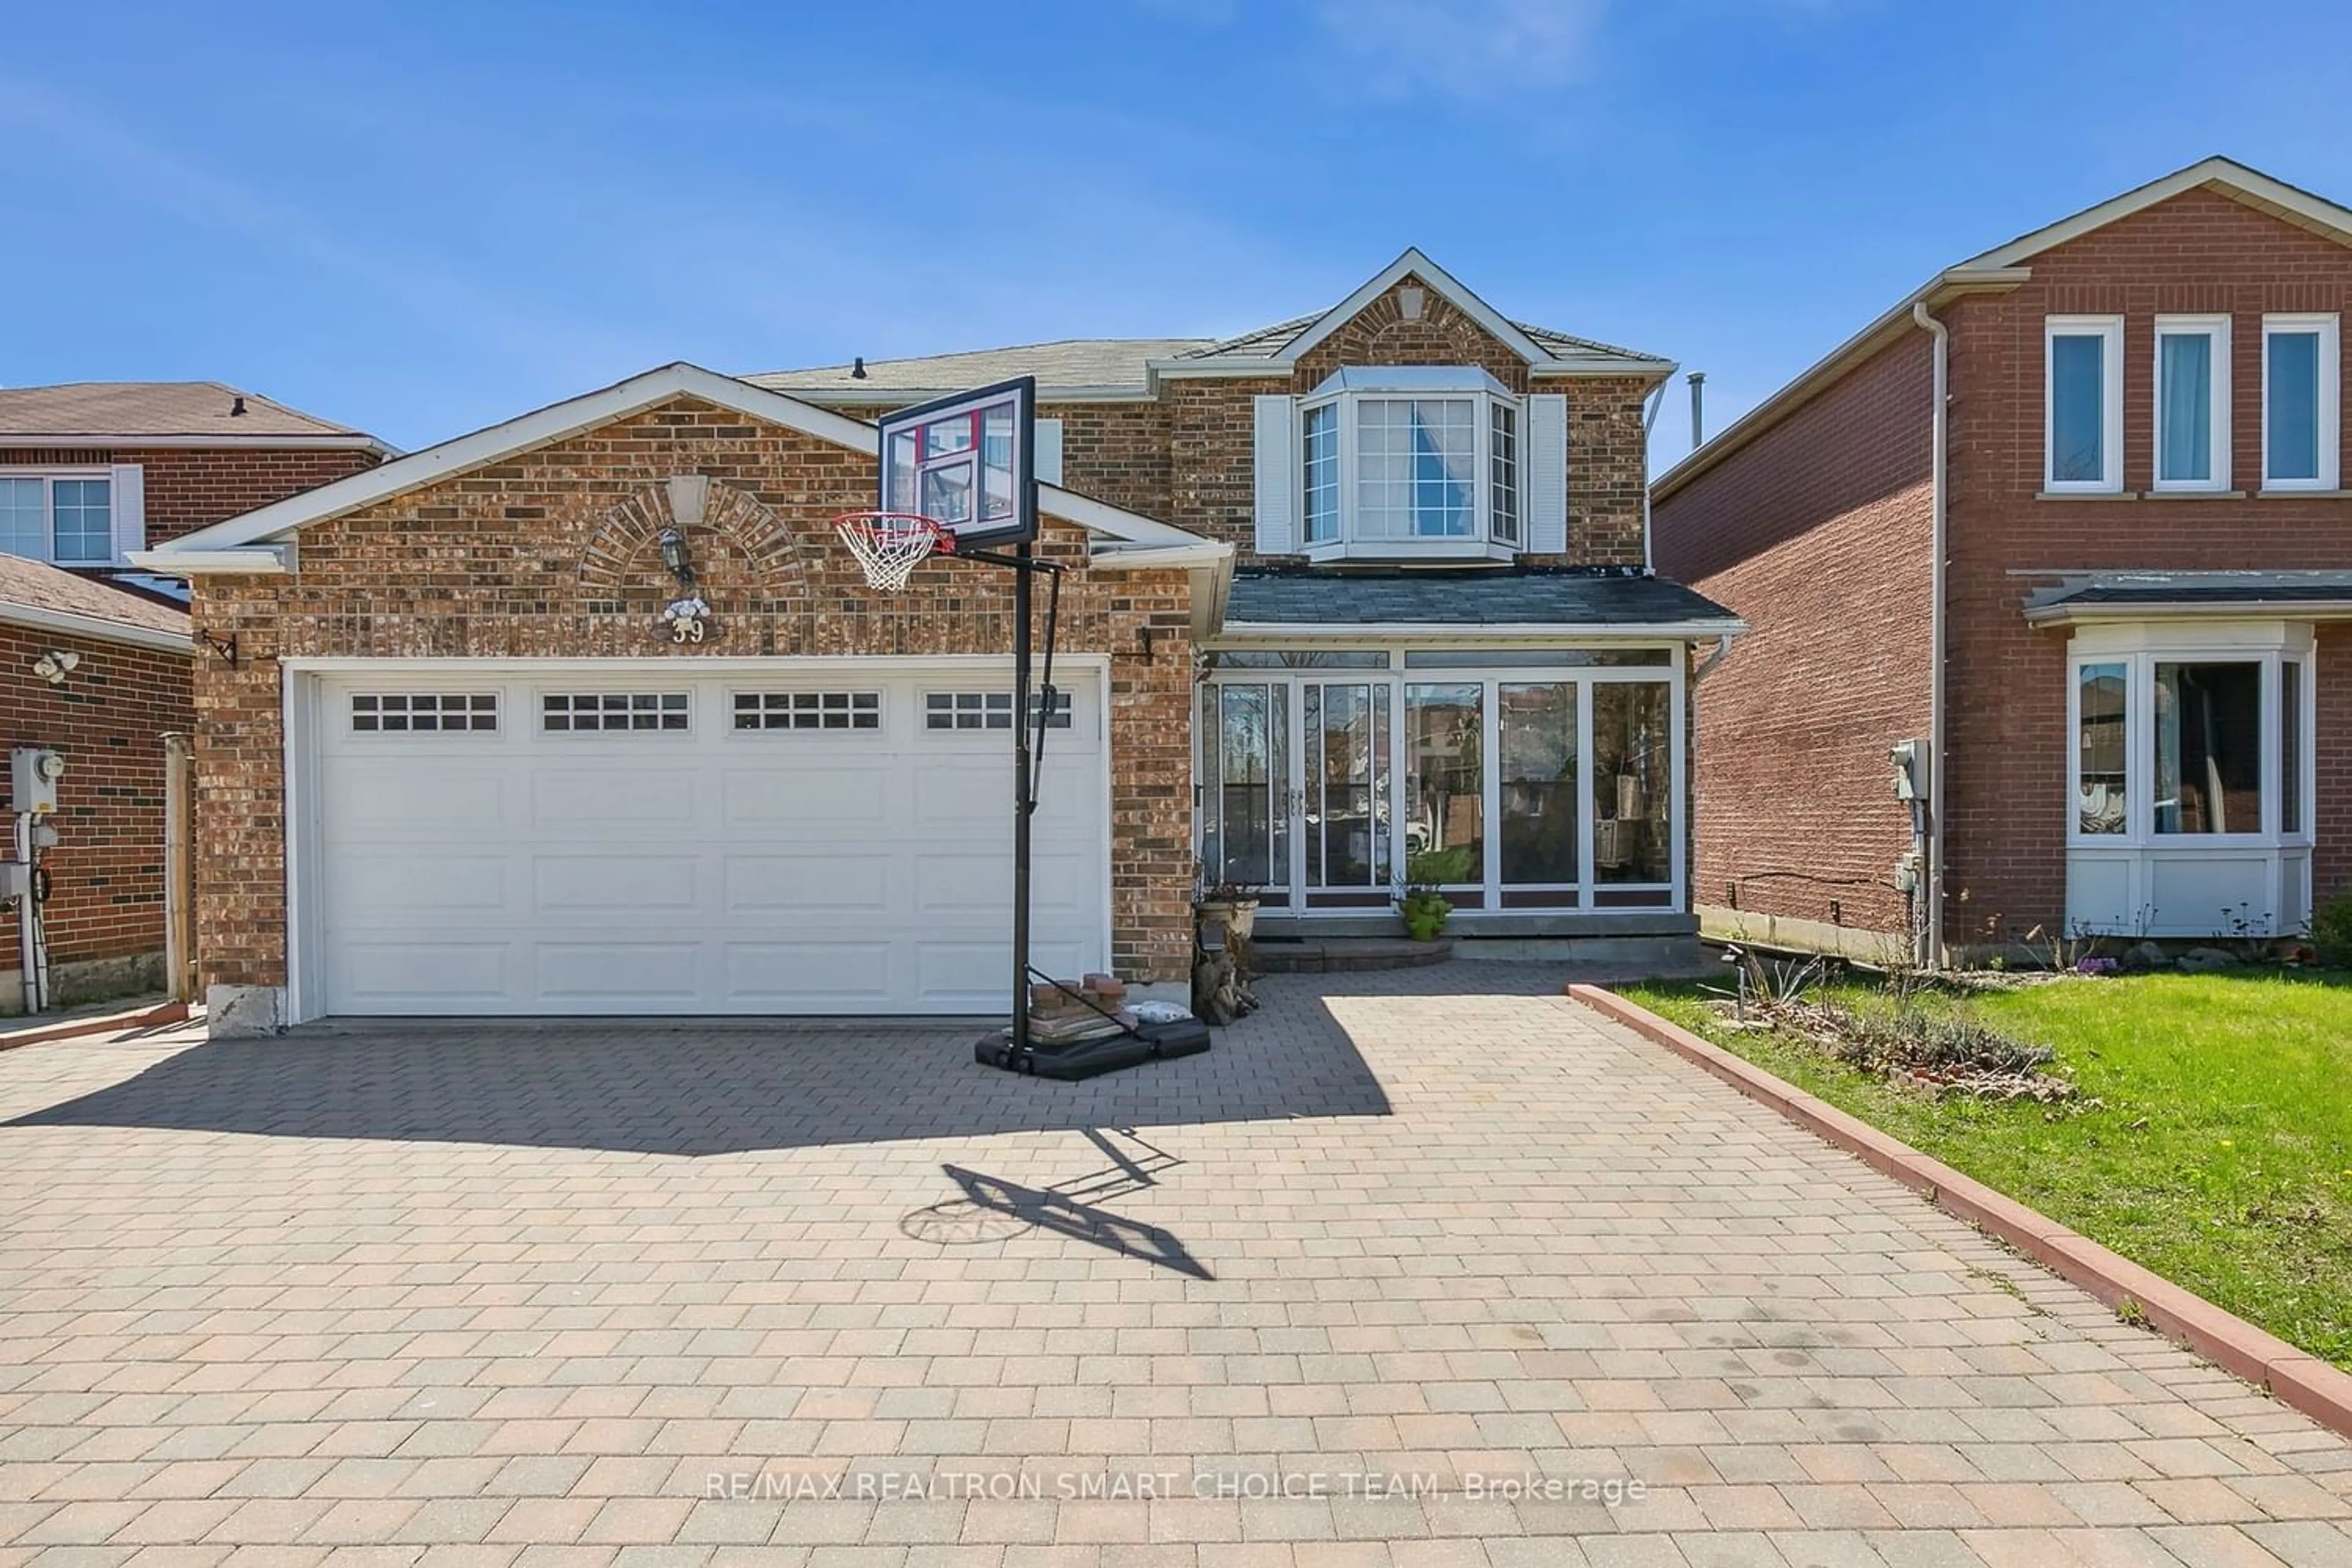 Home with brick exterior material for 39 Muirbank Blvd, Toronto Ontario M1C 4T7